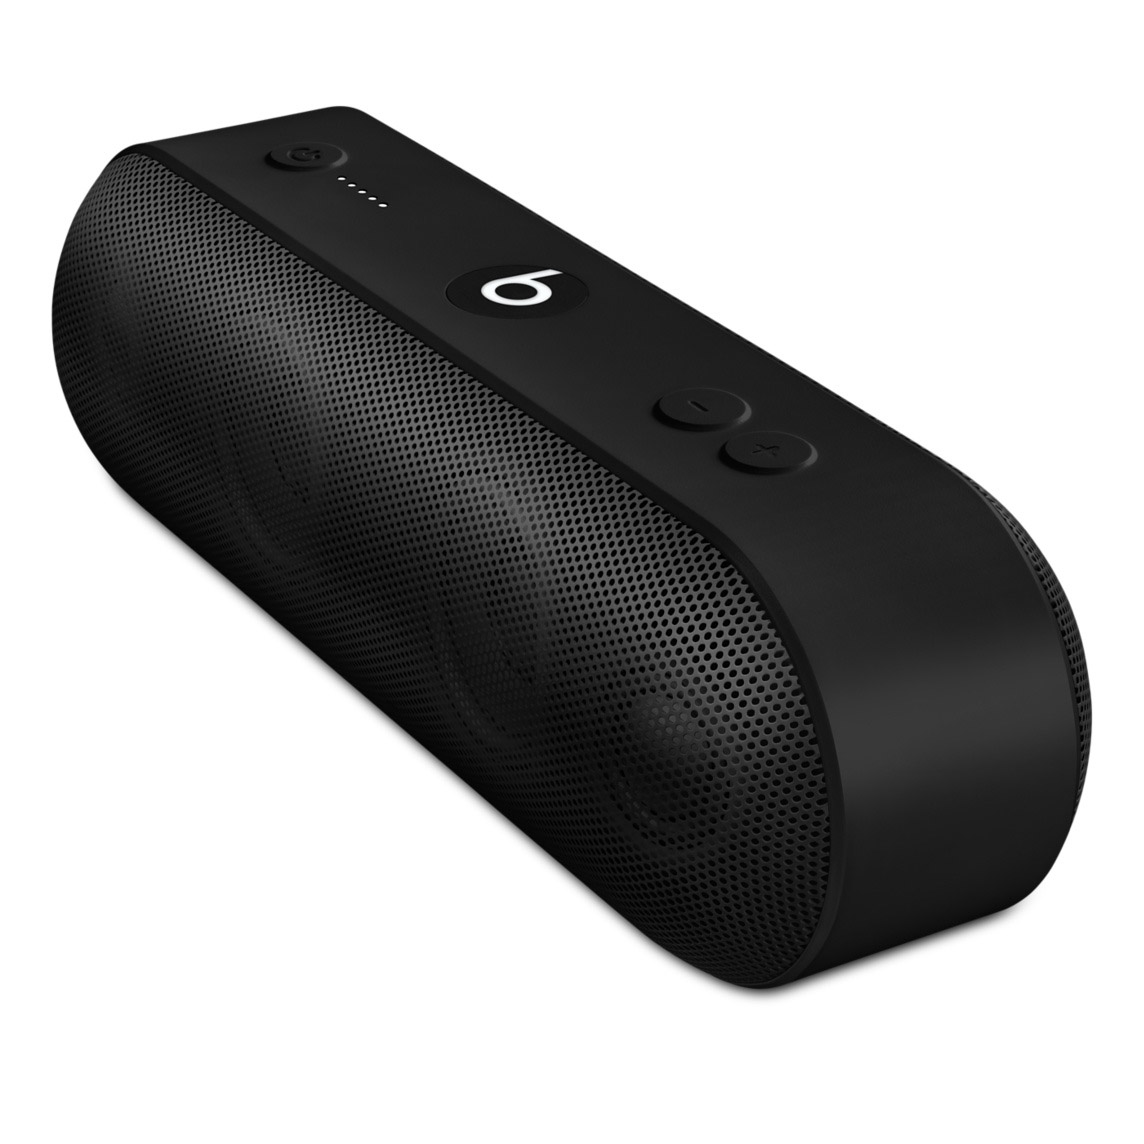 Apple&#039;s New Beats Pill+ Speaker is Now Available to Order